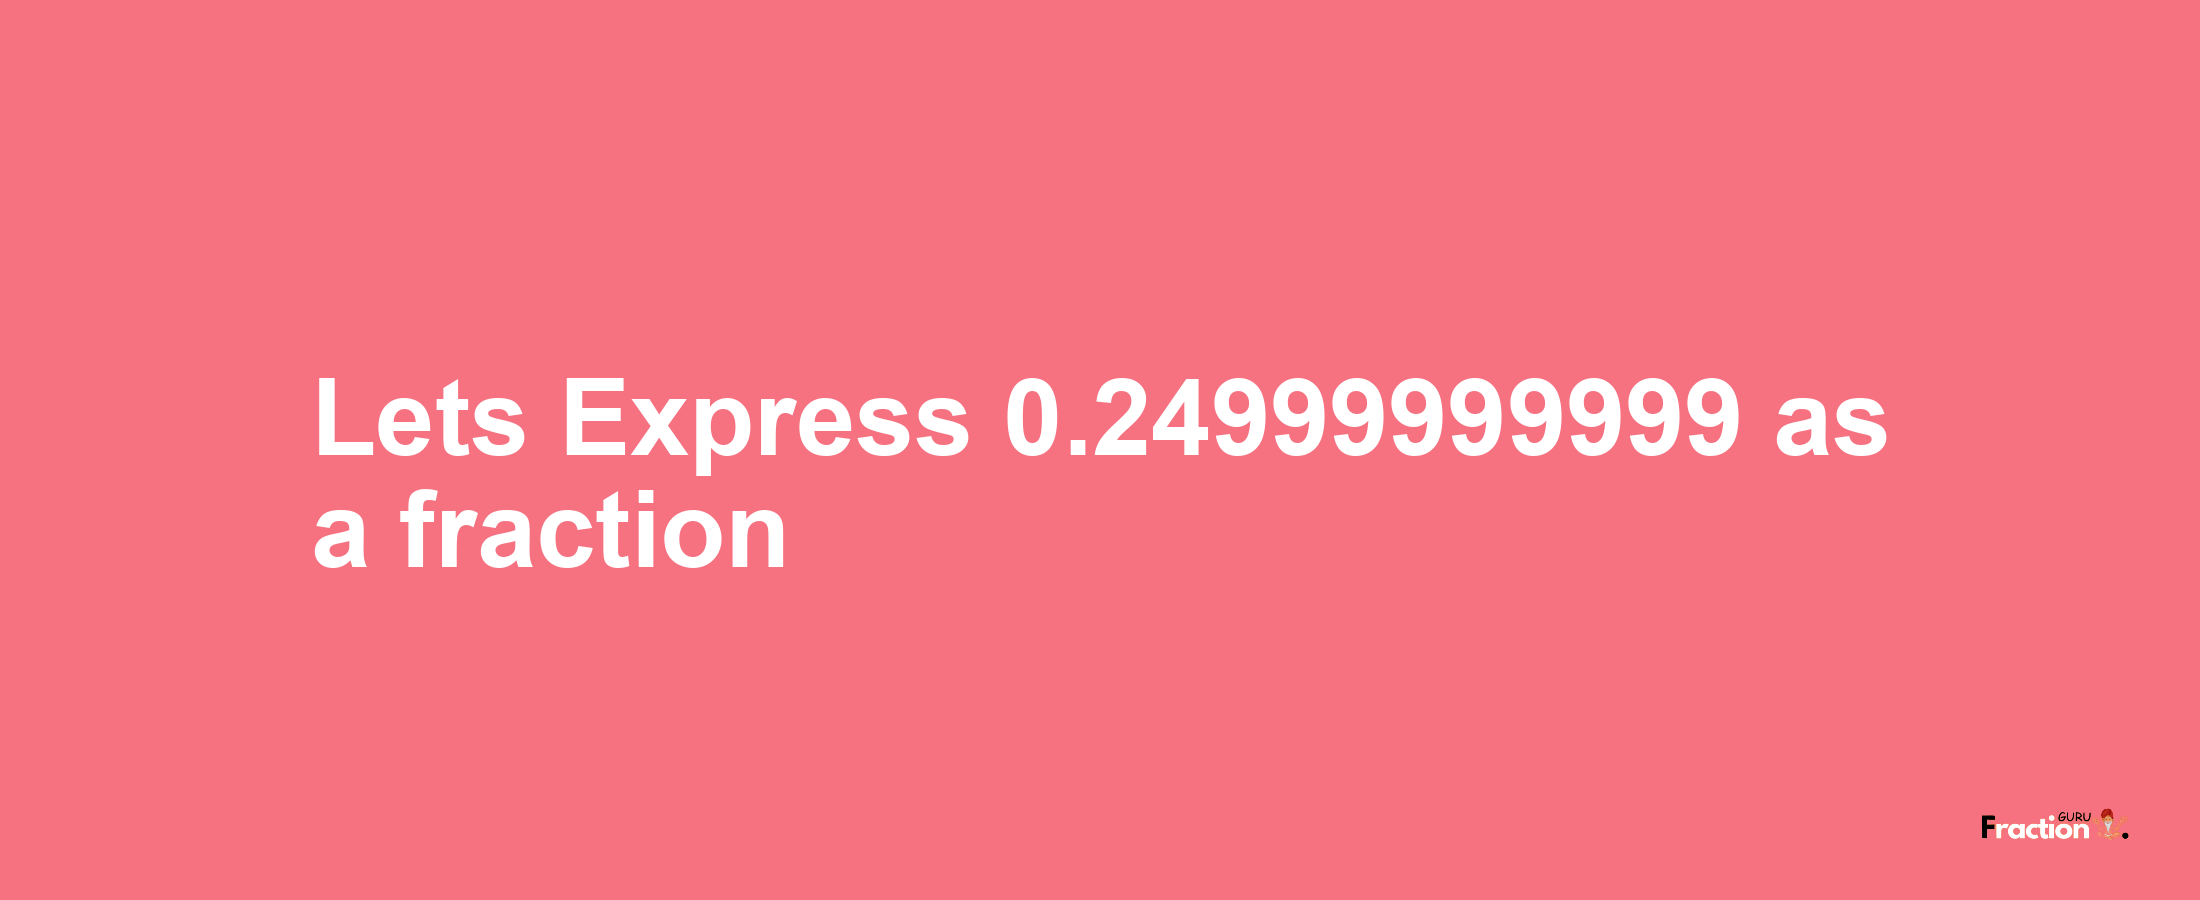 Lets Express 0.24999999999 as afraction